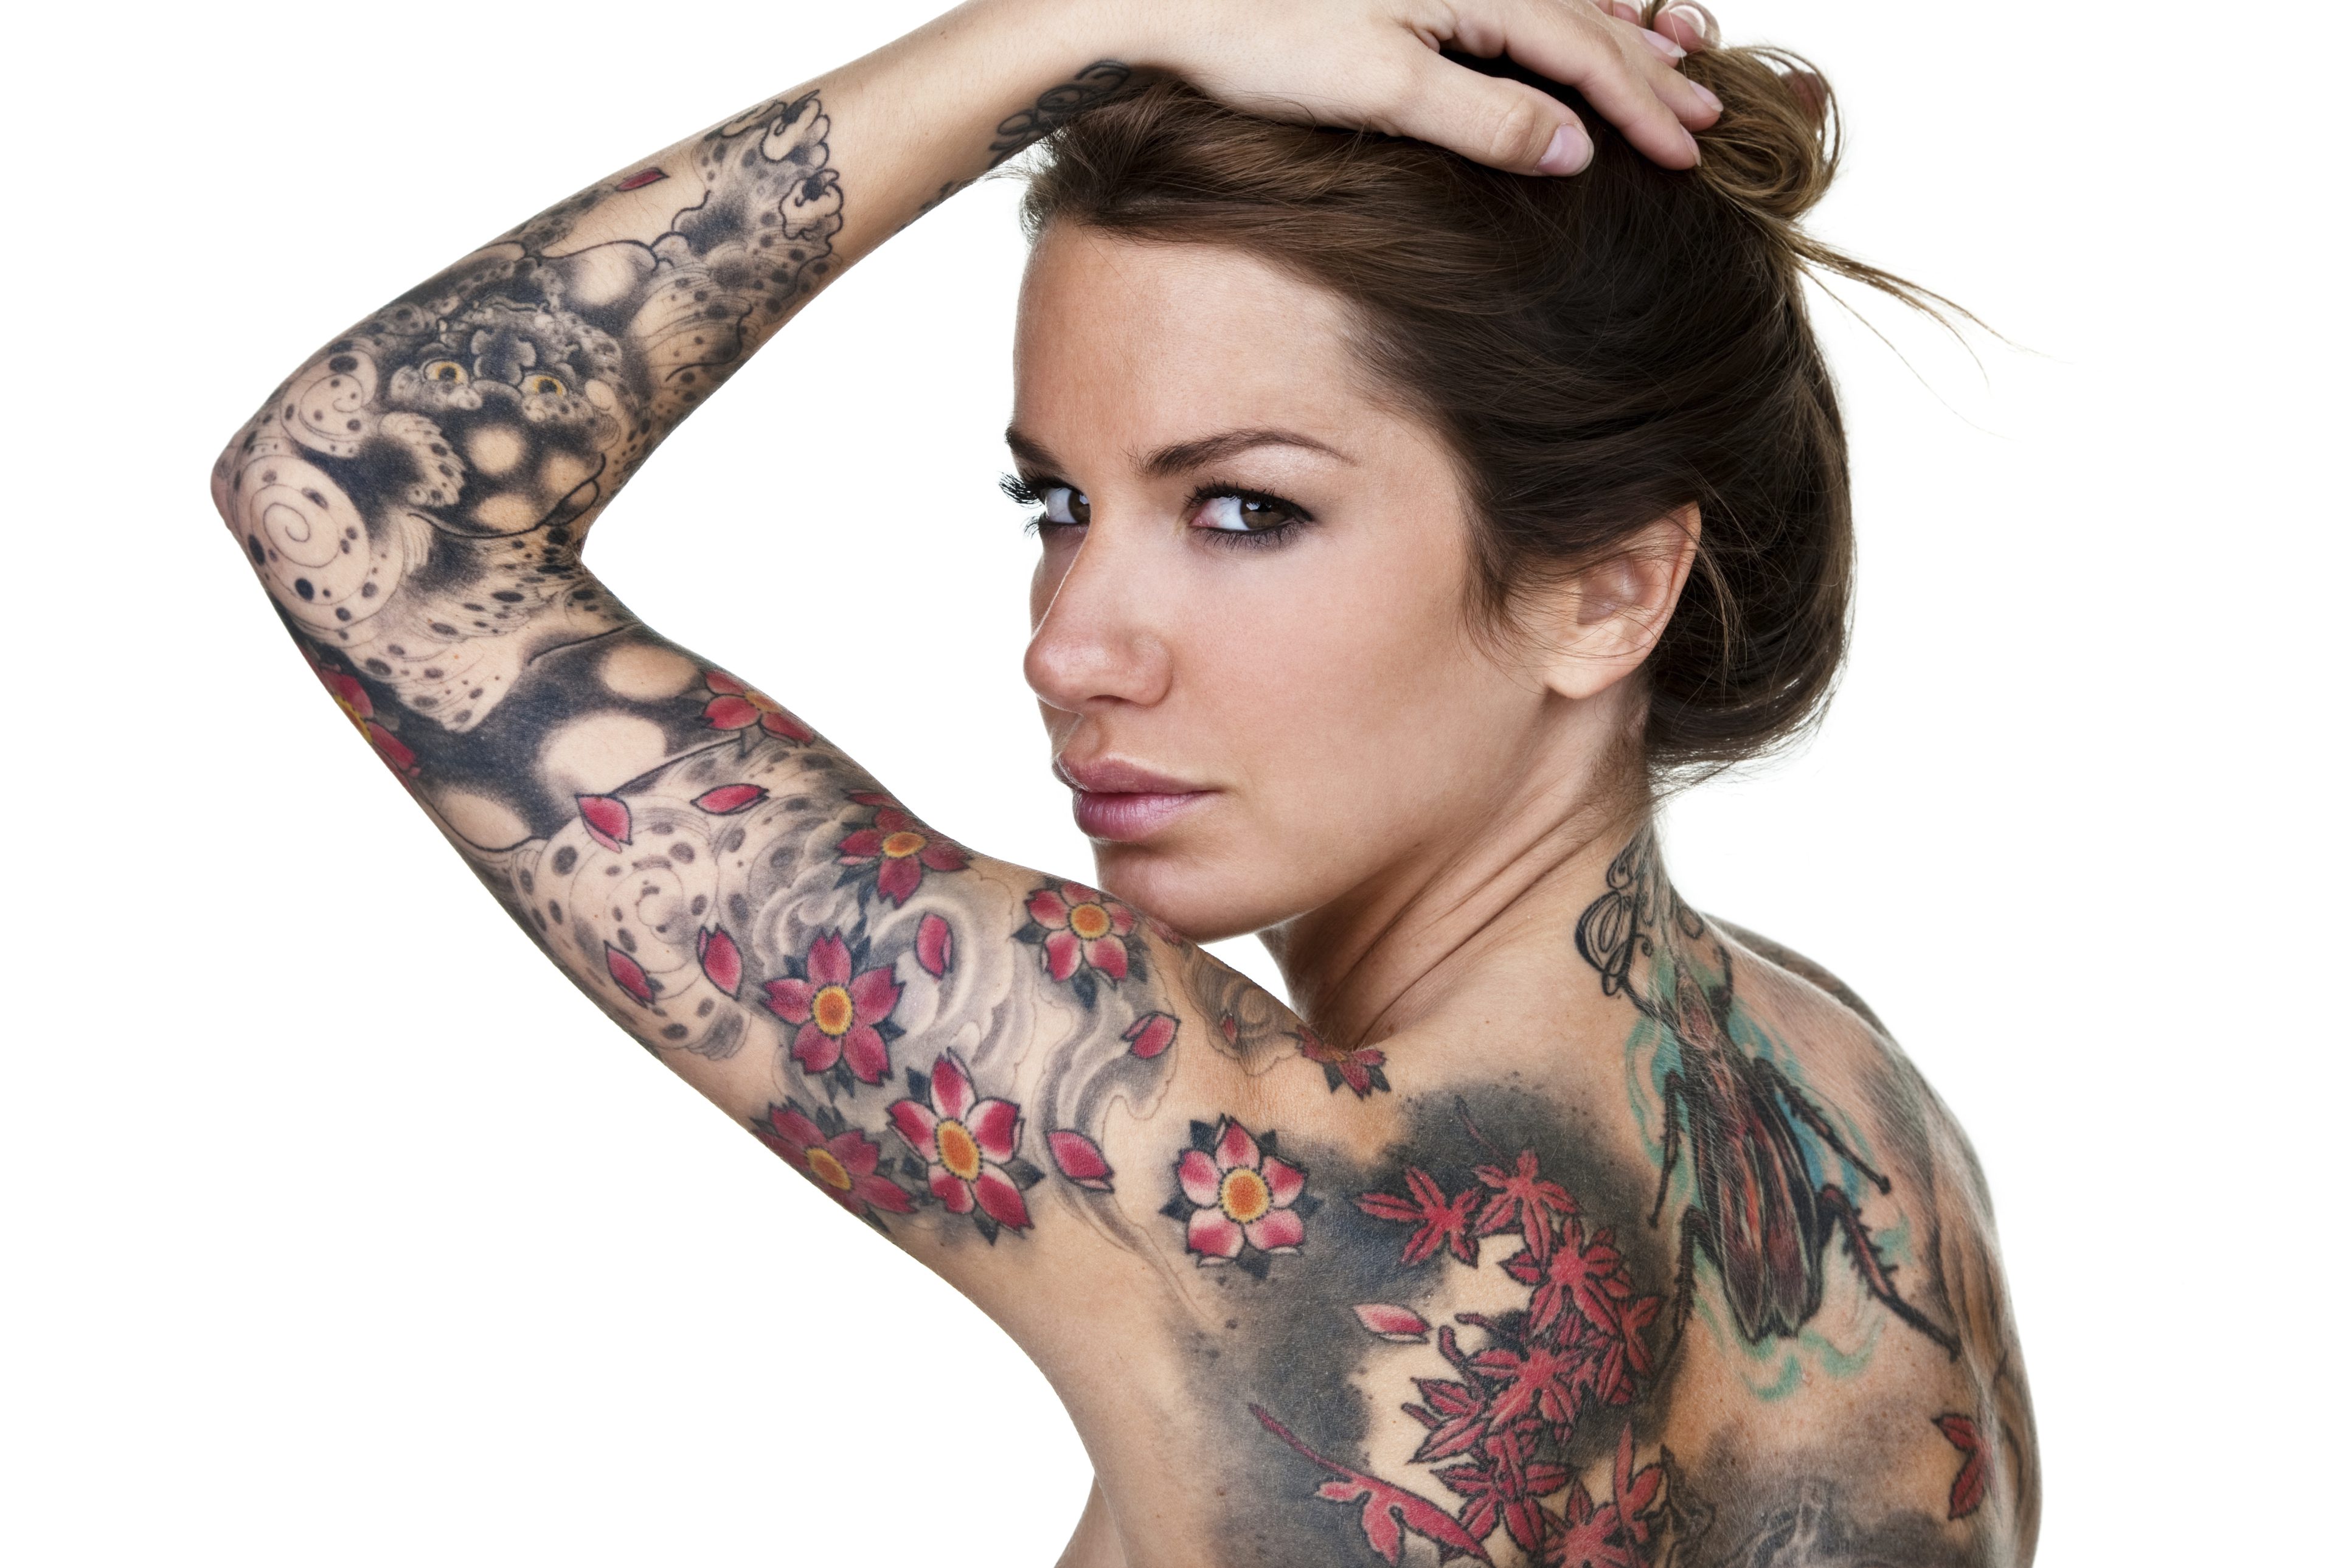 Laser Tattoo Removal – Don’t Live With Regret!